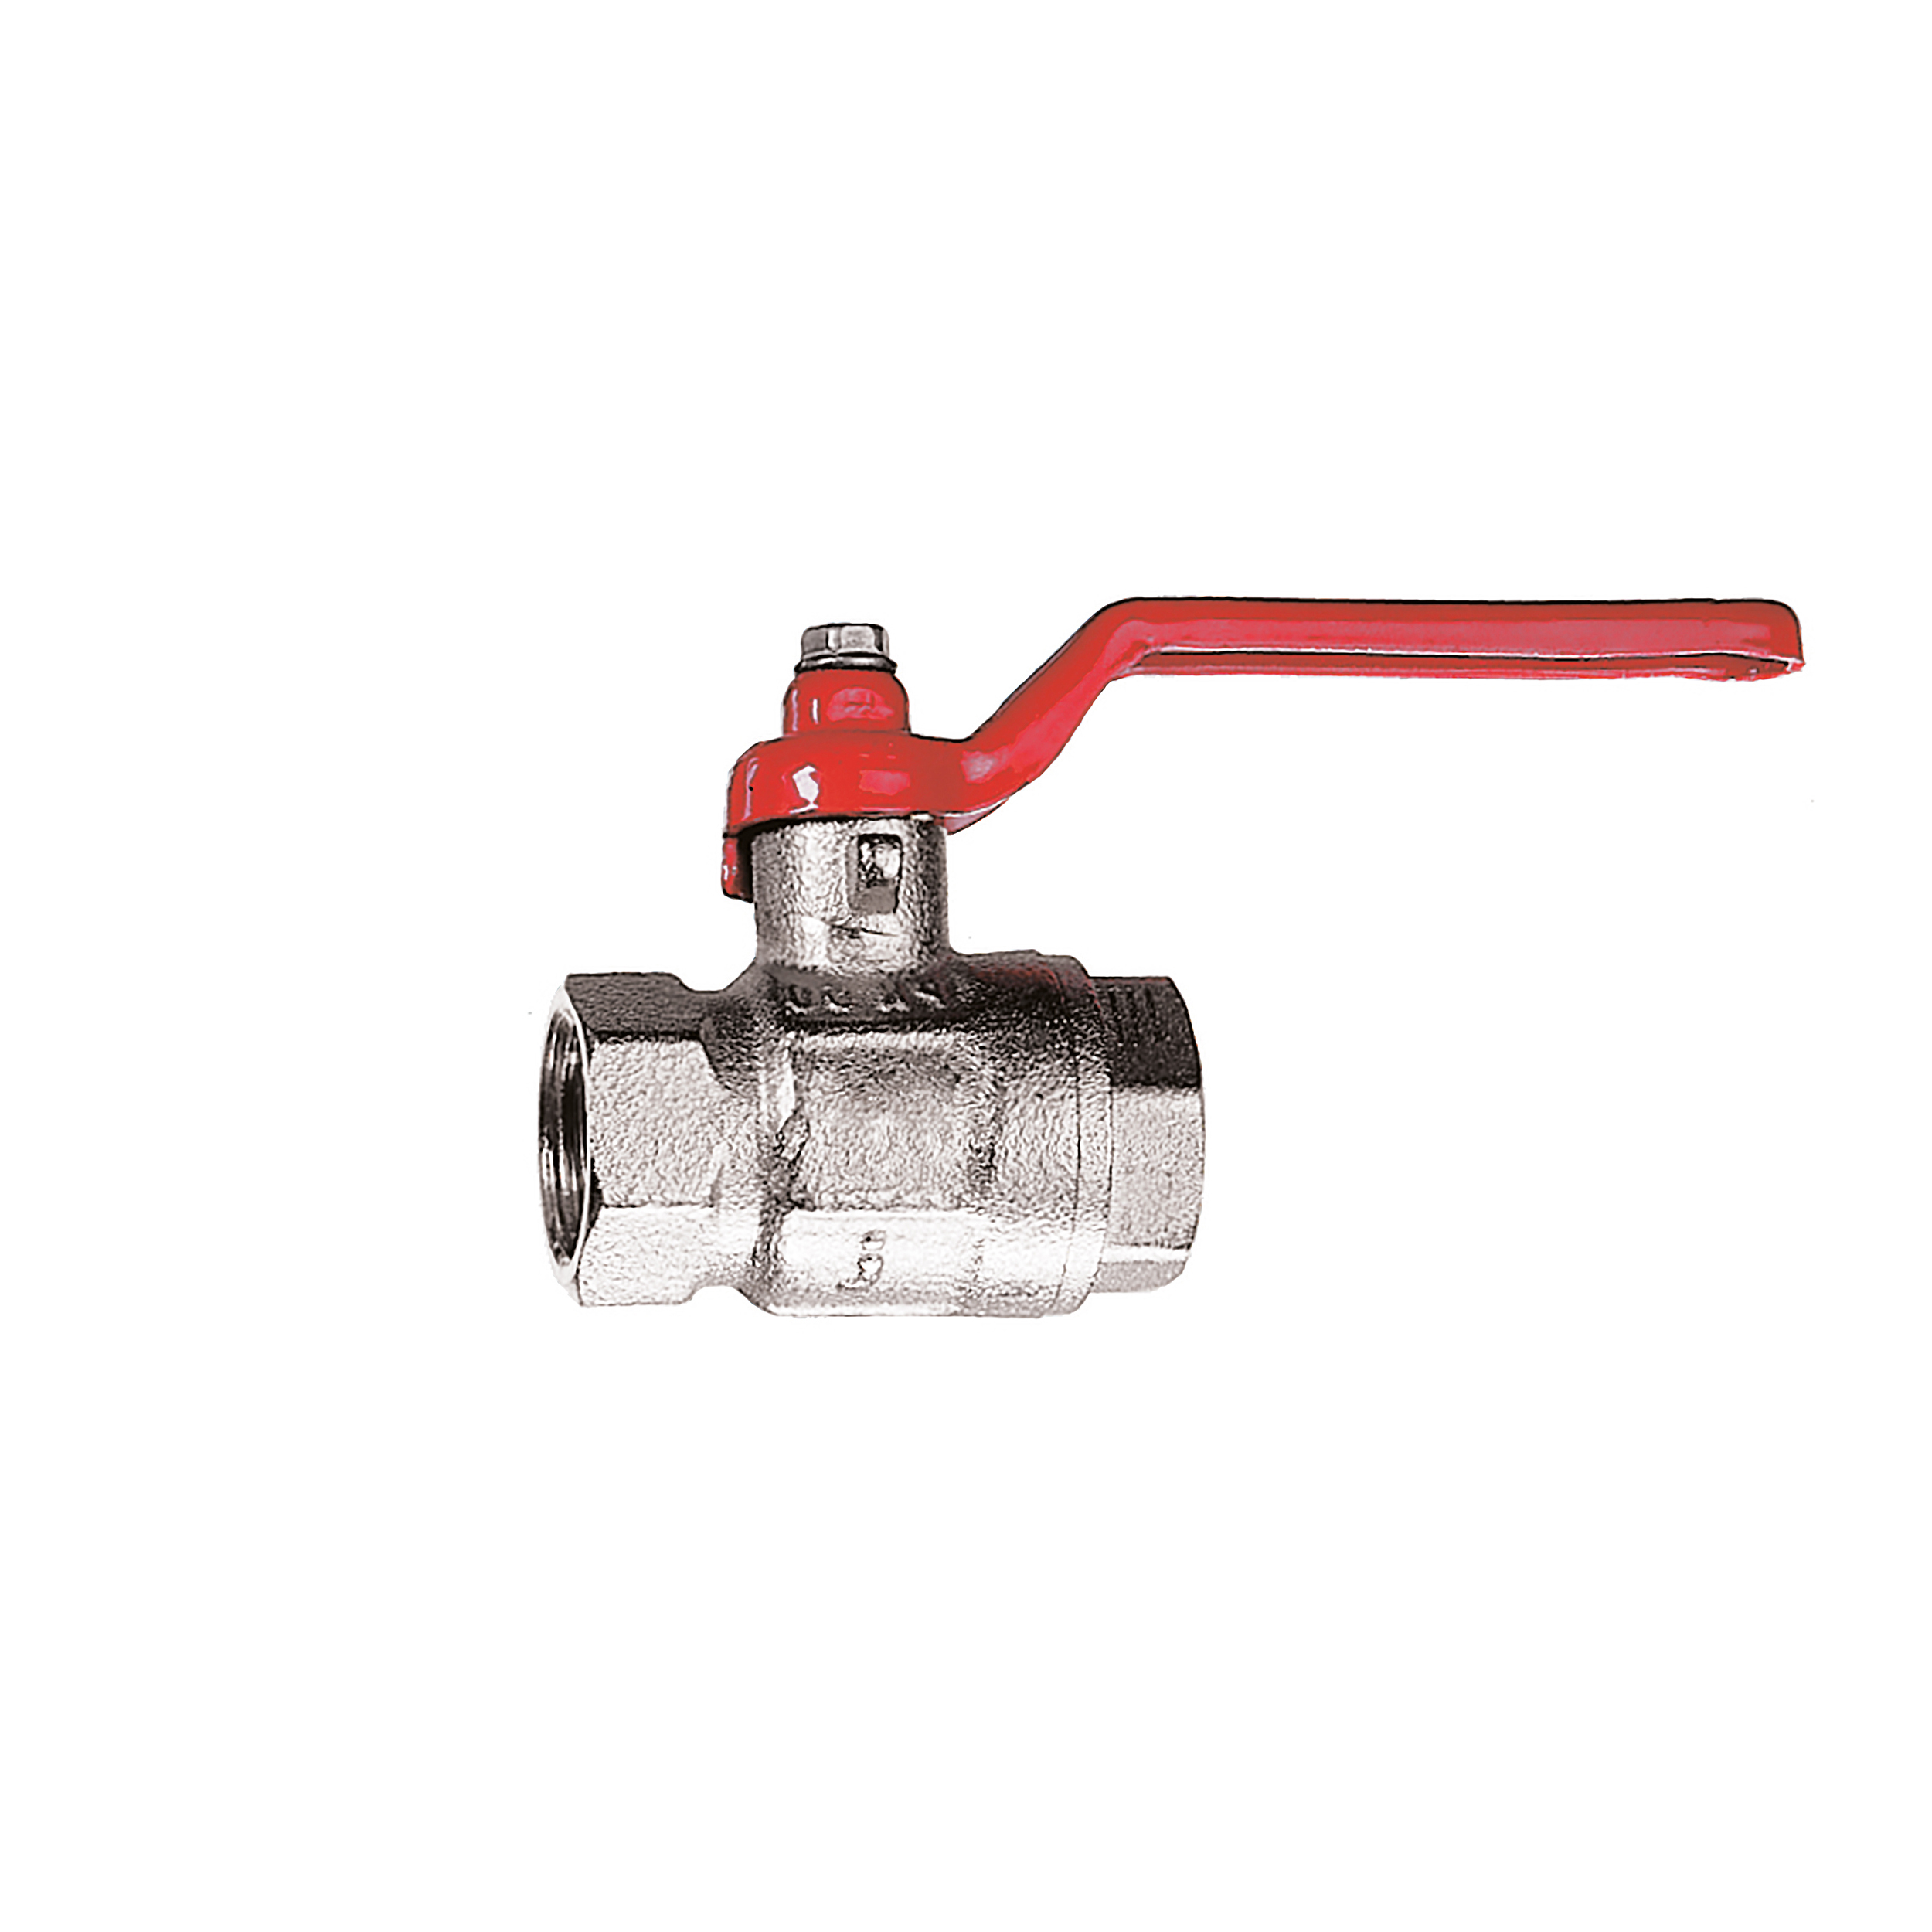 Compact ball valve, metal handle, length: 44.4 mm, DN 8, G¼ f–f, passage ≙ connection thread, max. operating pressure: 725 psi